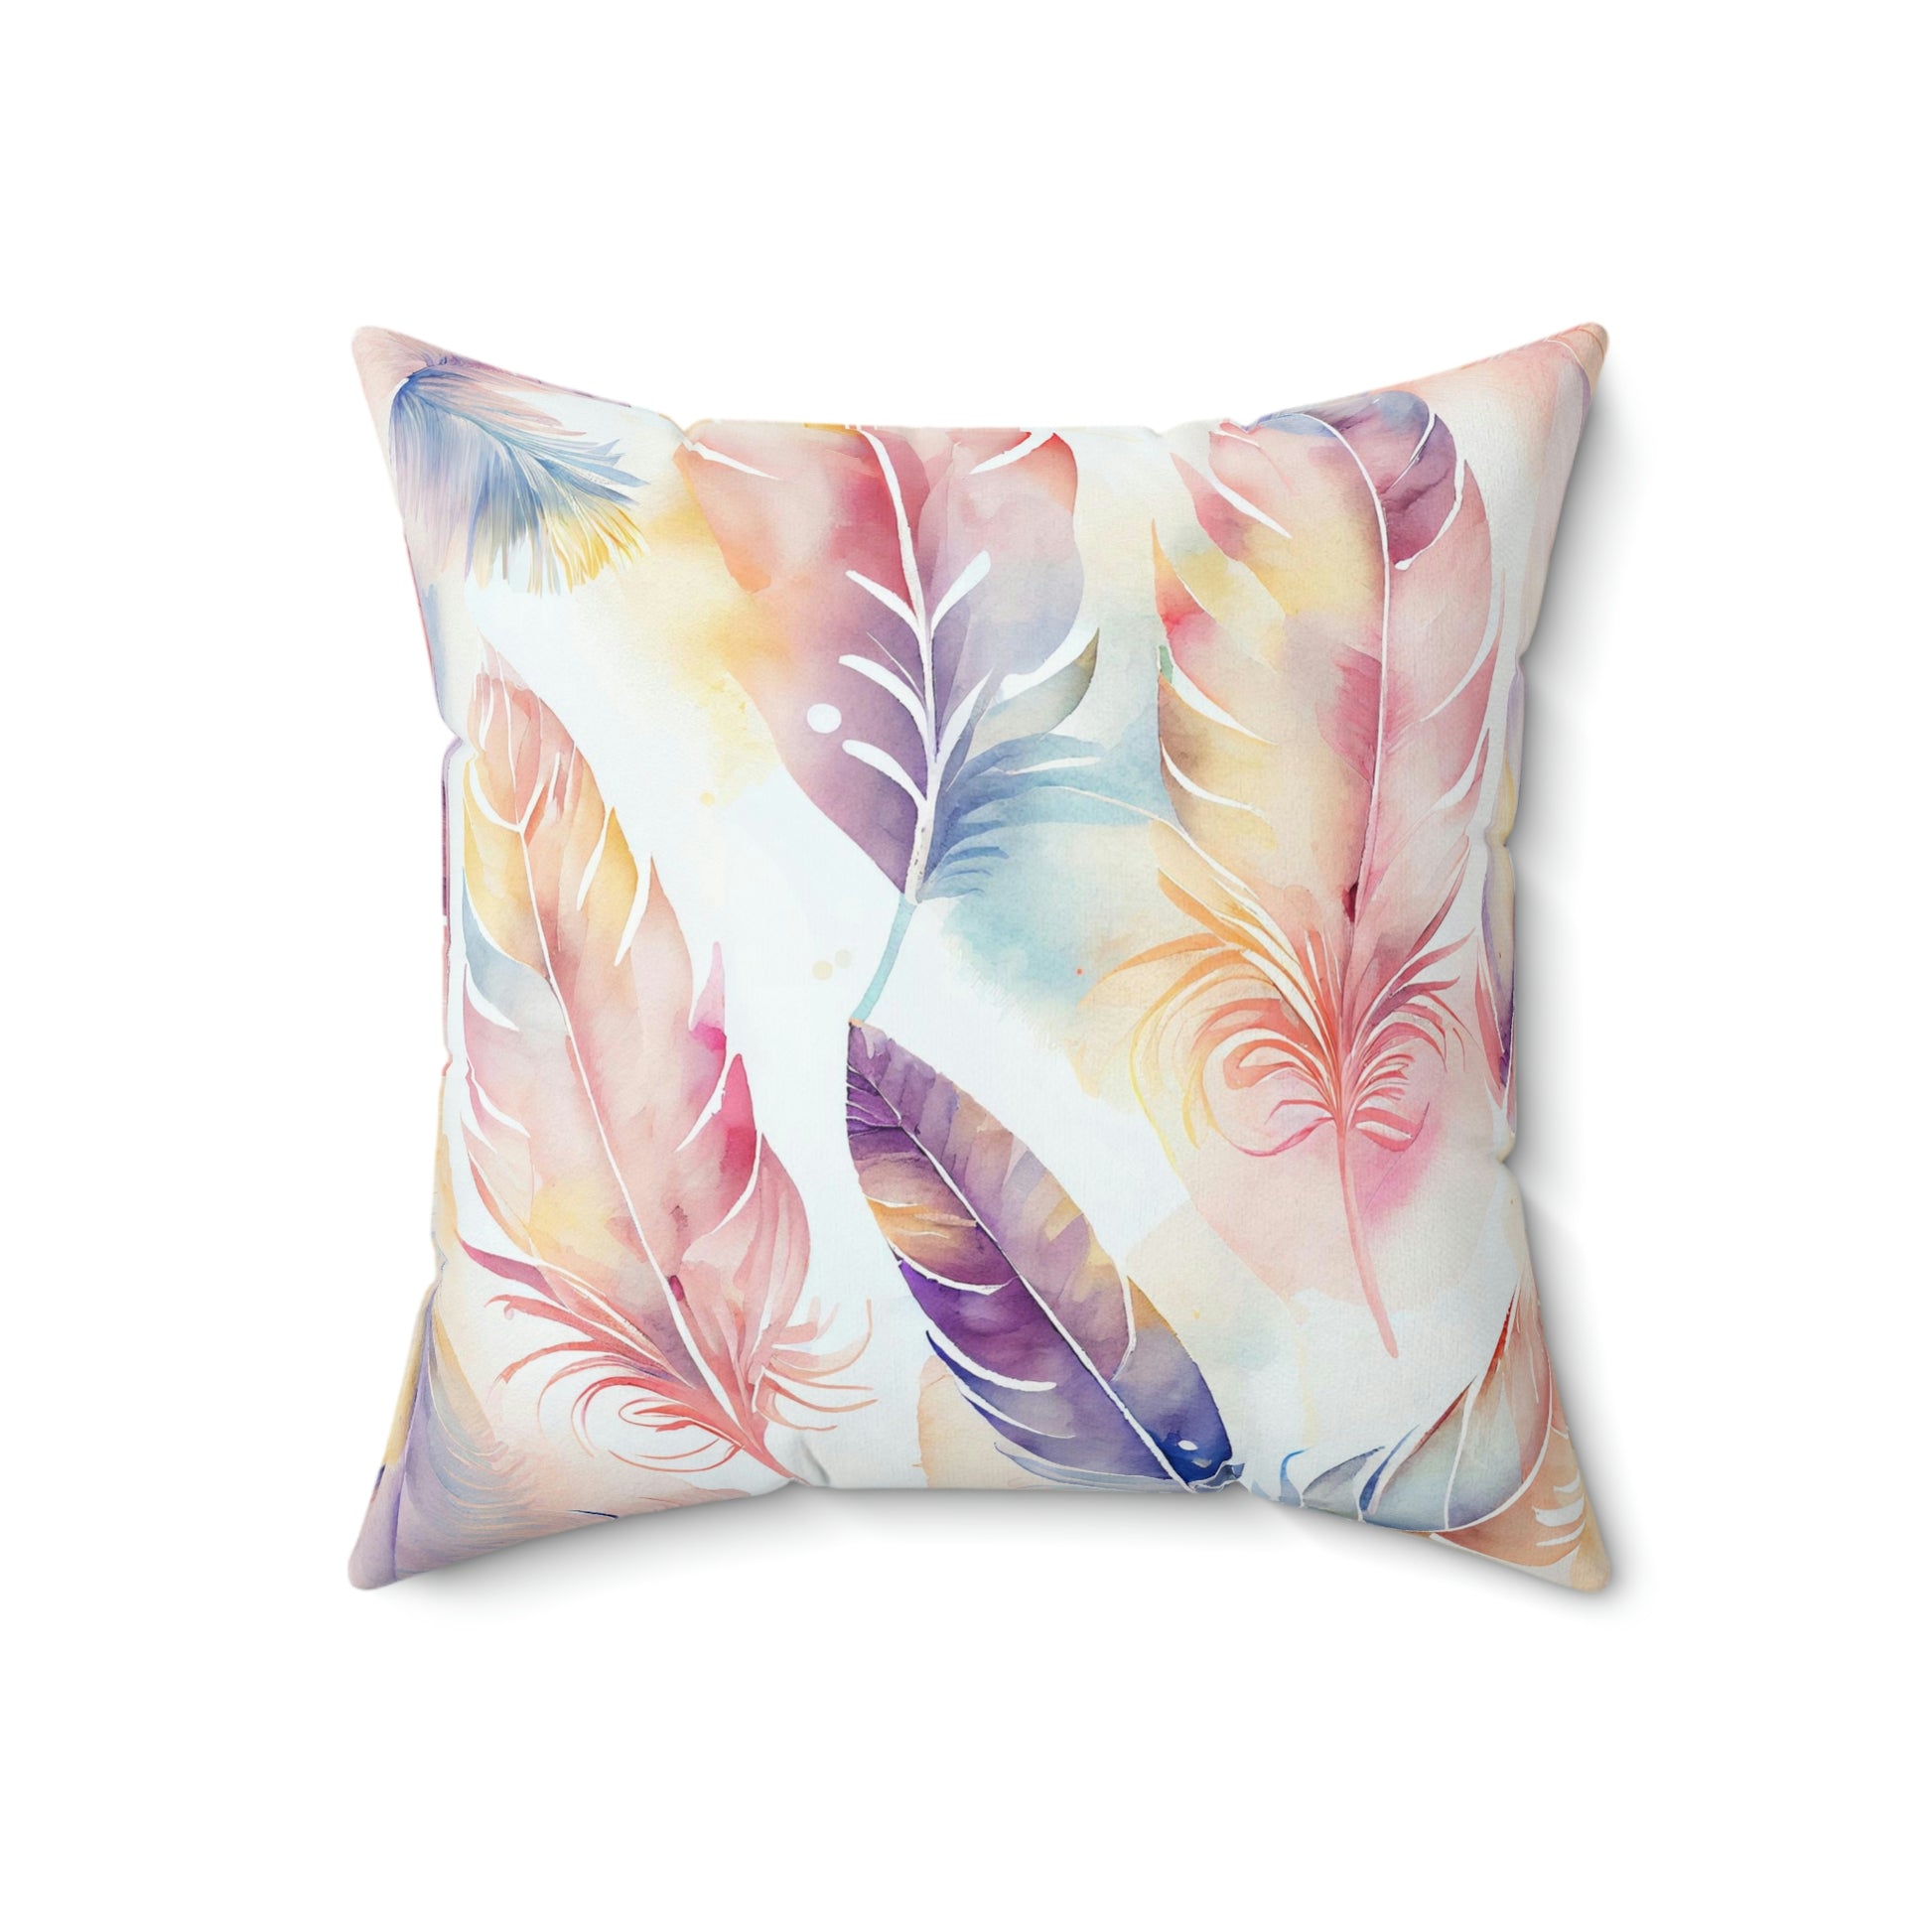 this is a feather pattern pillow sitting on a sofa, feather throw pillow on an arm chair, feather pillow for your home decor, style your space with a watercolor feather pillow